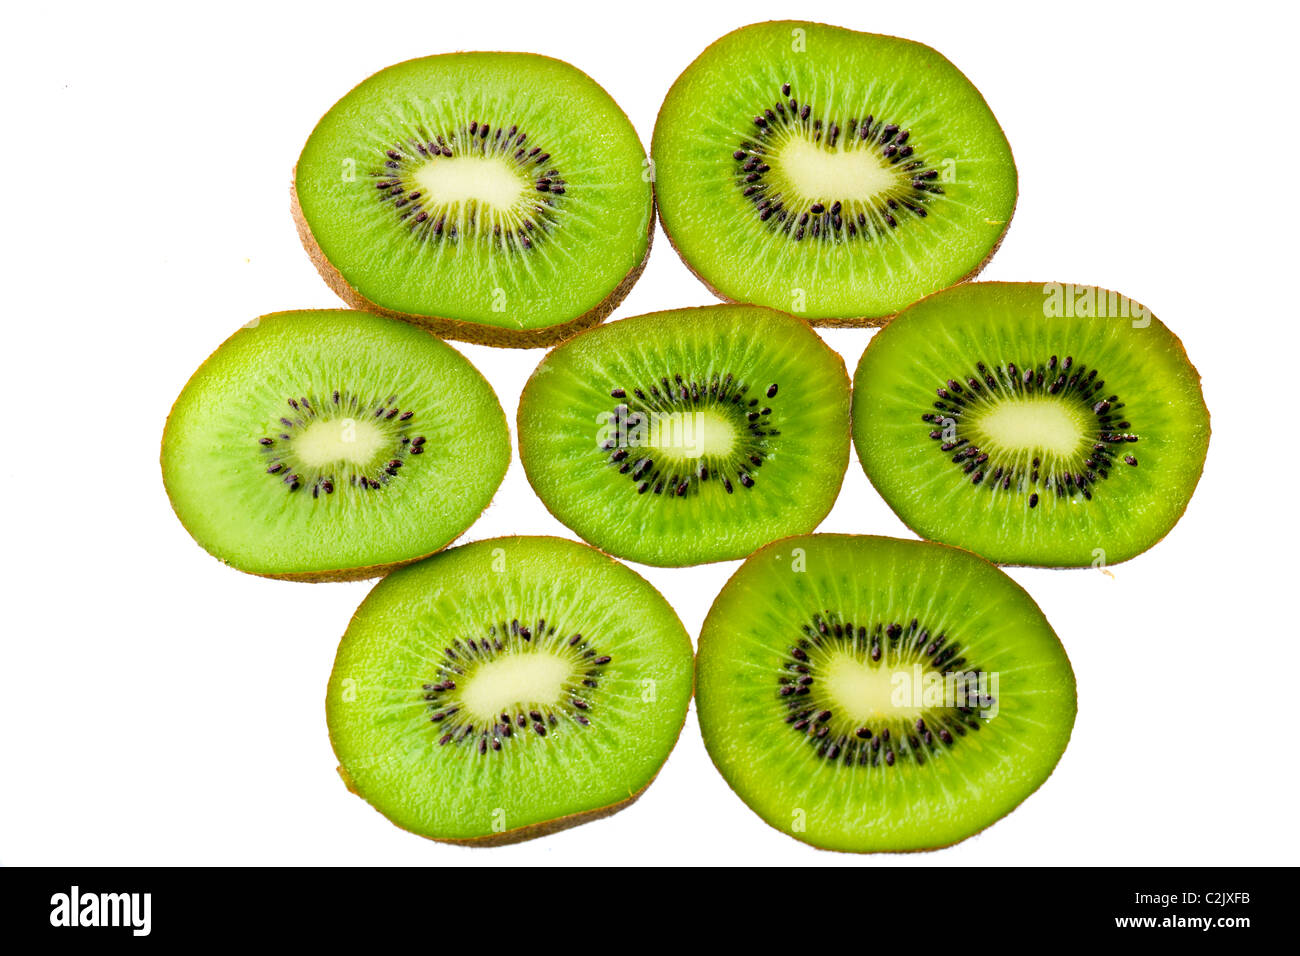 Tranches de kiwi vert isolated on white Banque D'Images